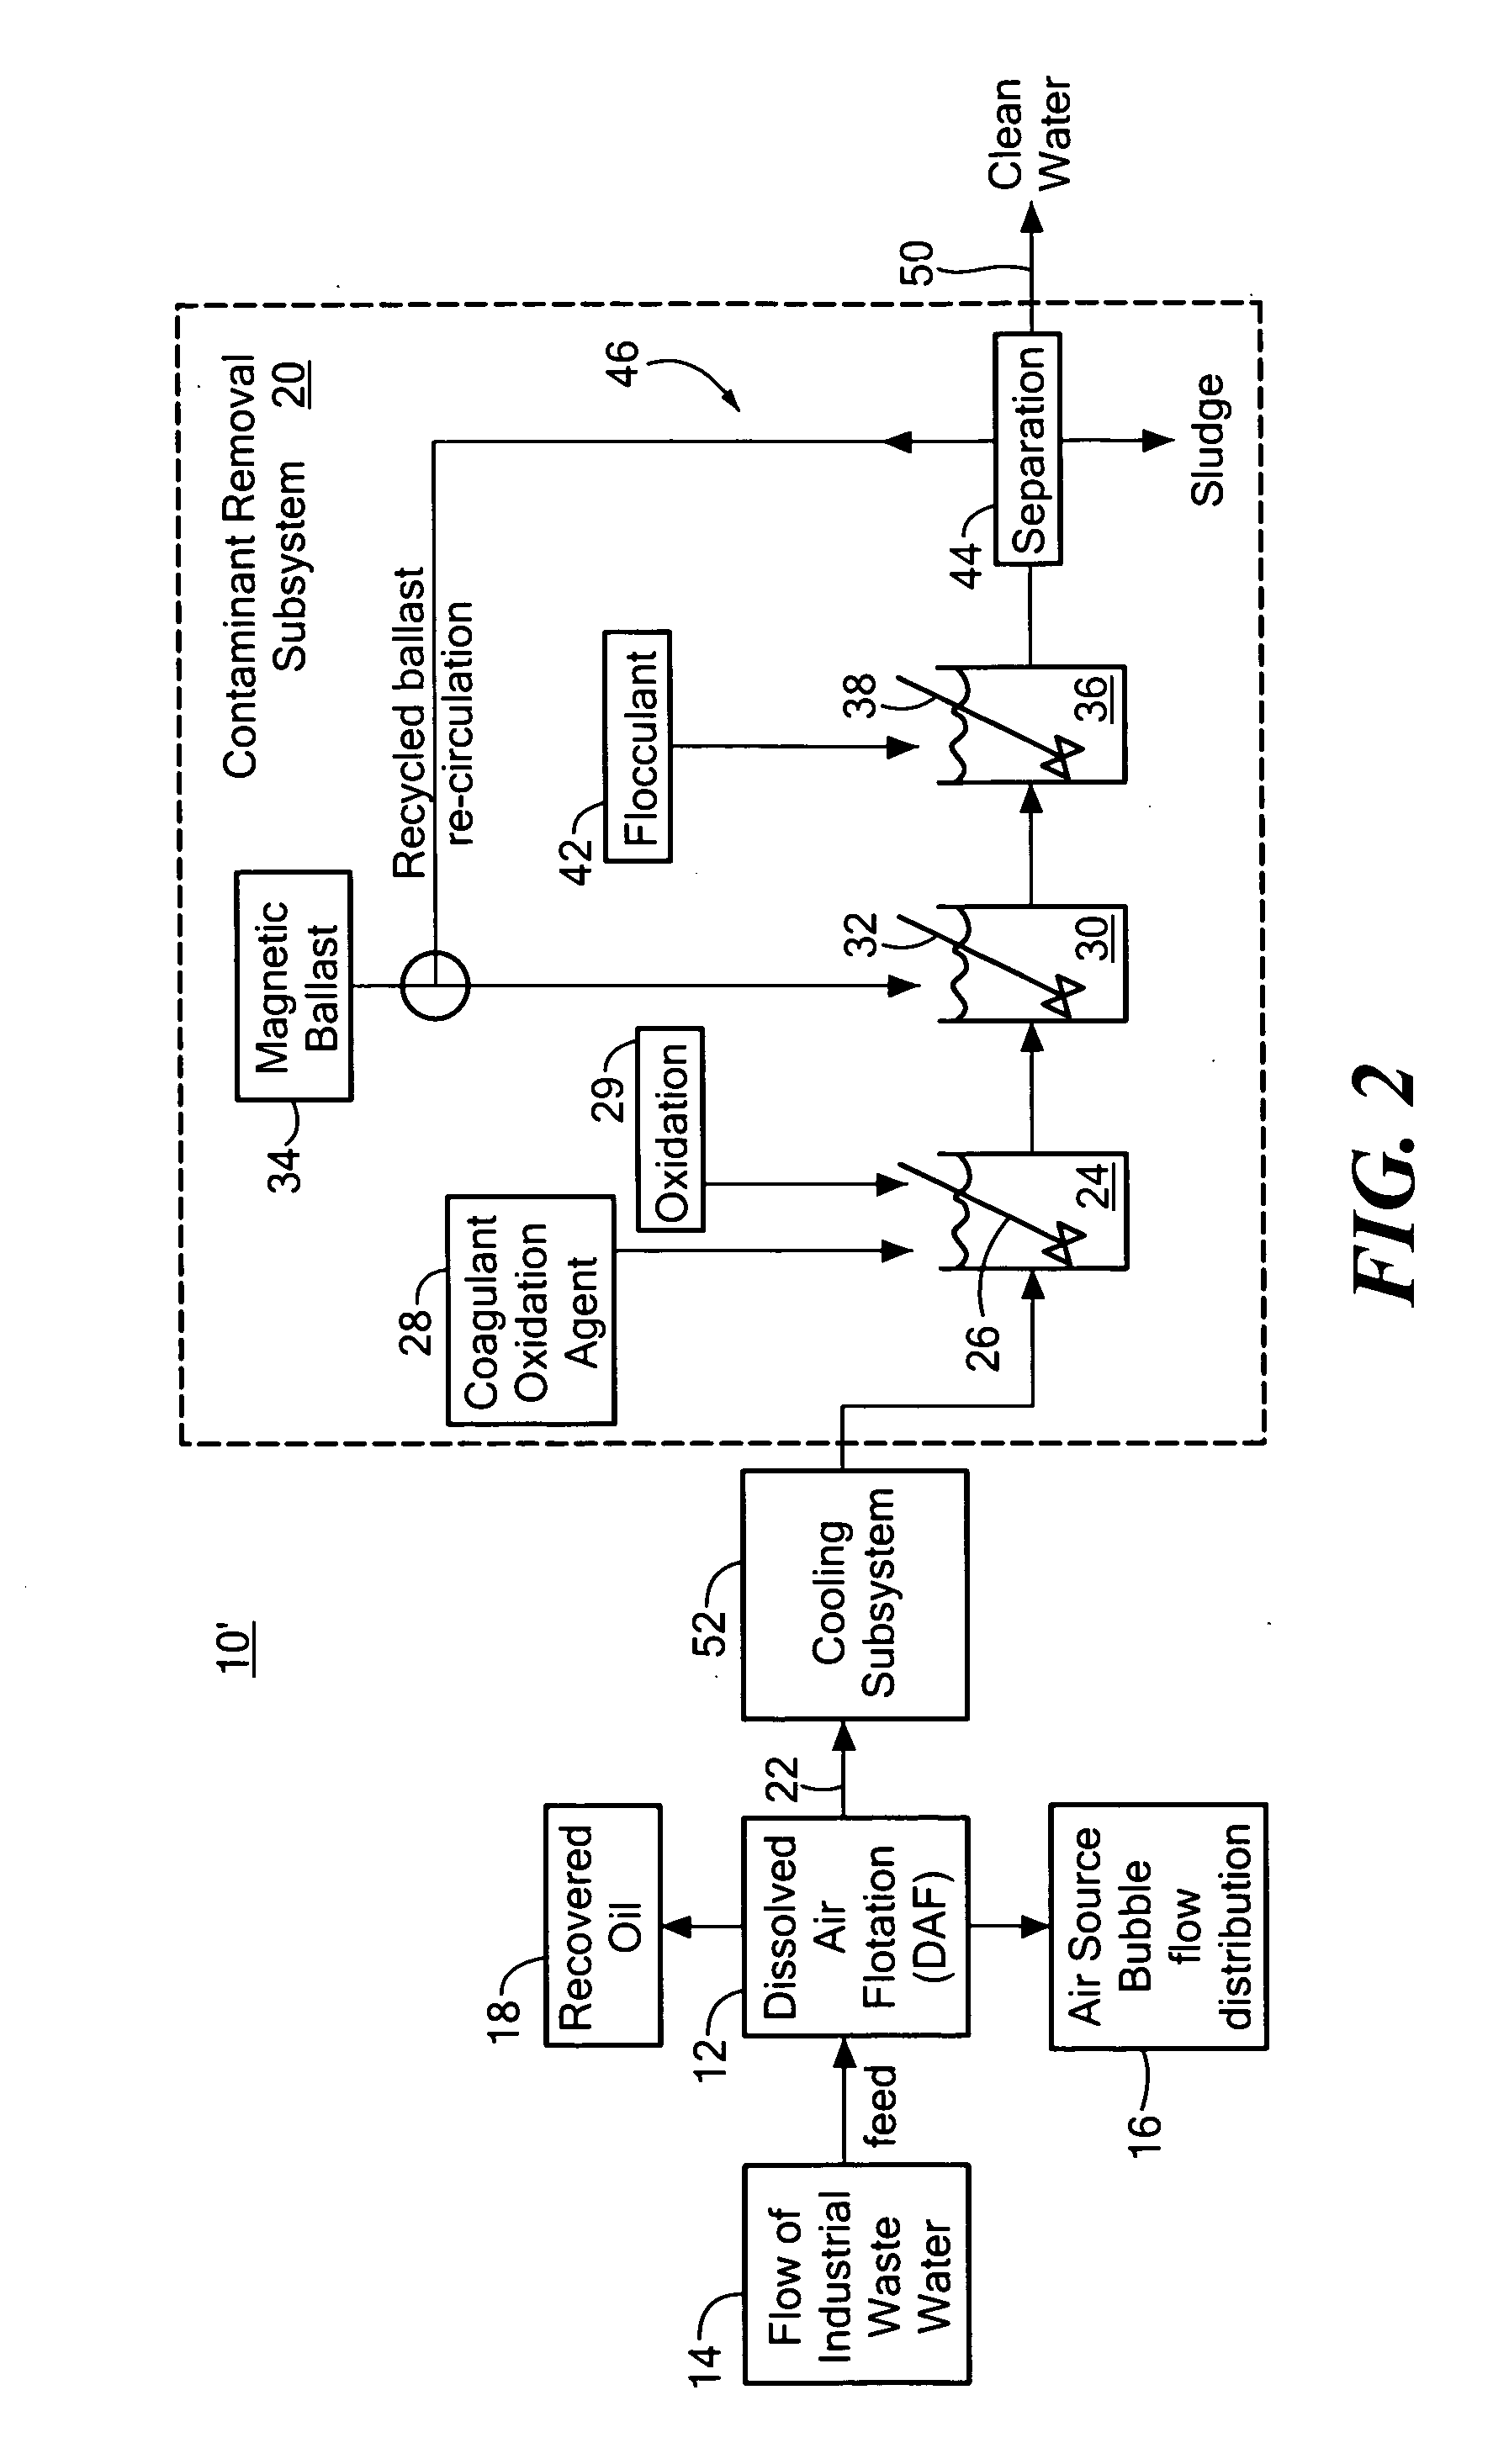 System and method for removing dissolved contaminants, particulate contaminants, and oil contaminants from industrial waste water